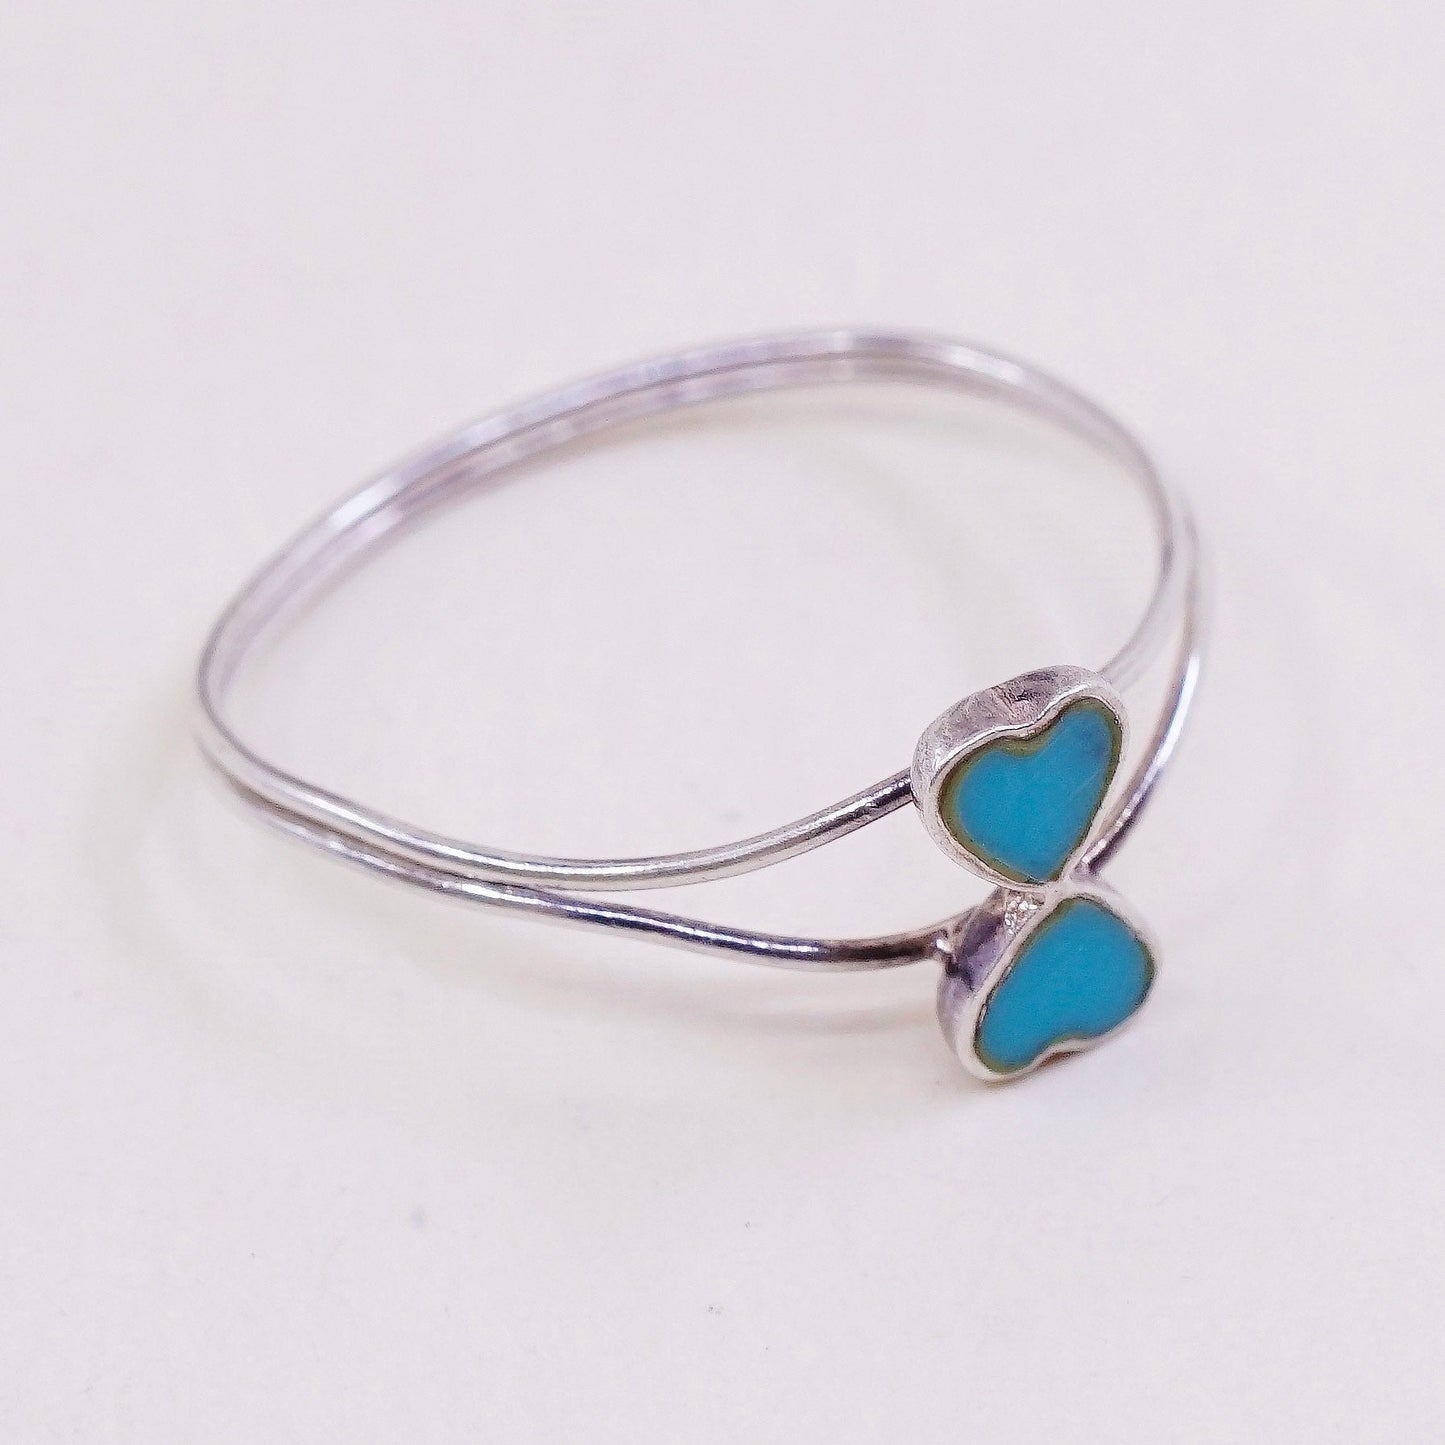 sz 8.25, vtg sterling silver handmade ring, Mexico 925 ring w/ turquoise hearts